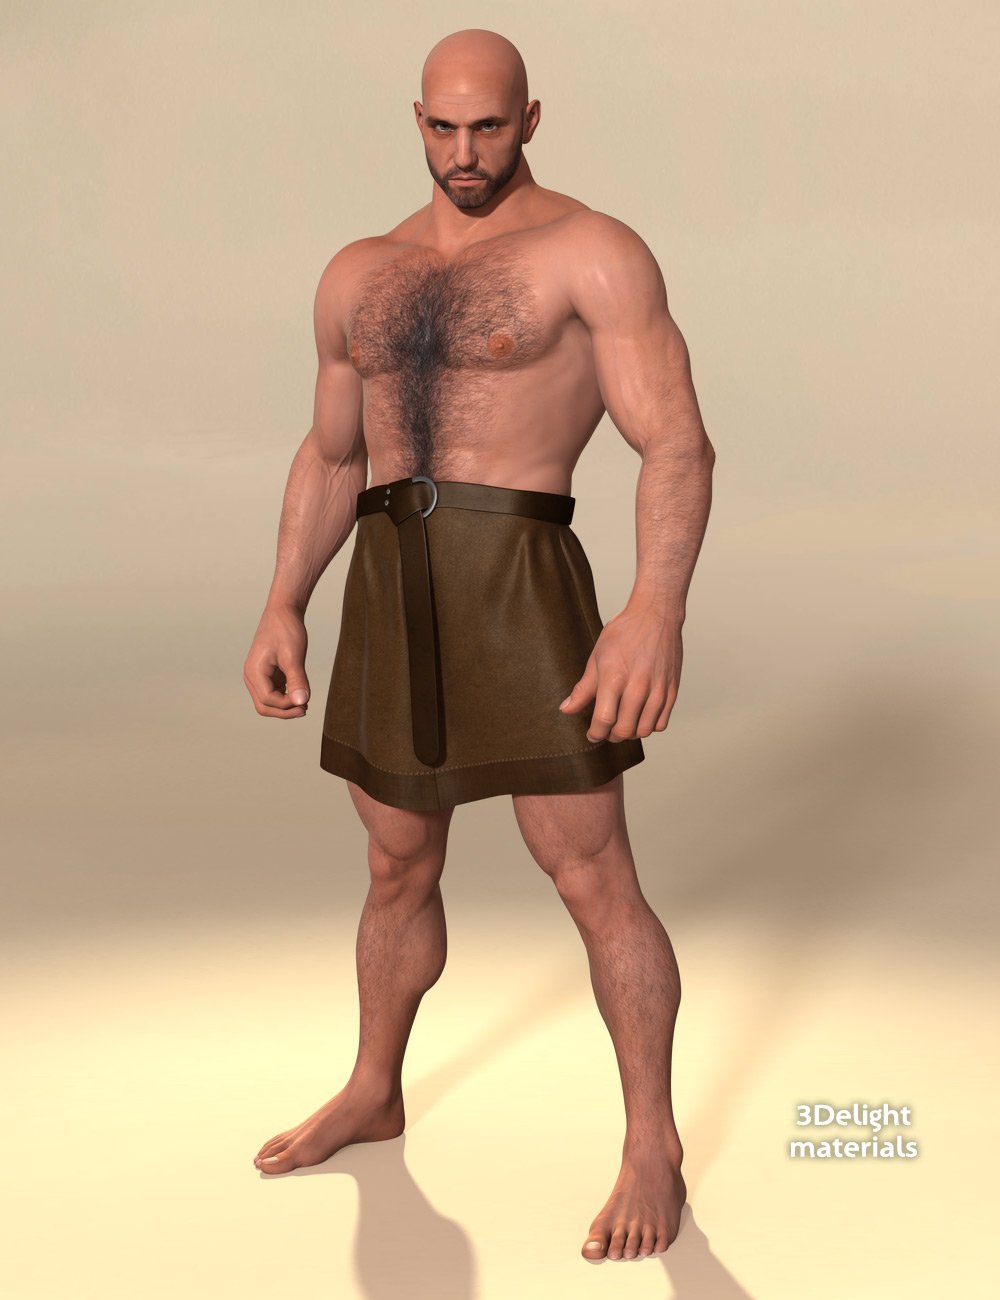 Lord of the Bears HD for Genesis 2 Male by: GhostofMacbeth, 3D Models by Daz 3D